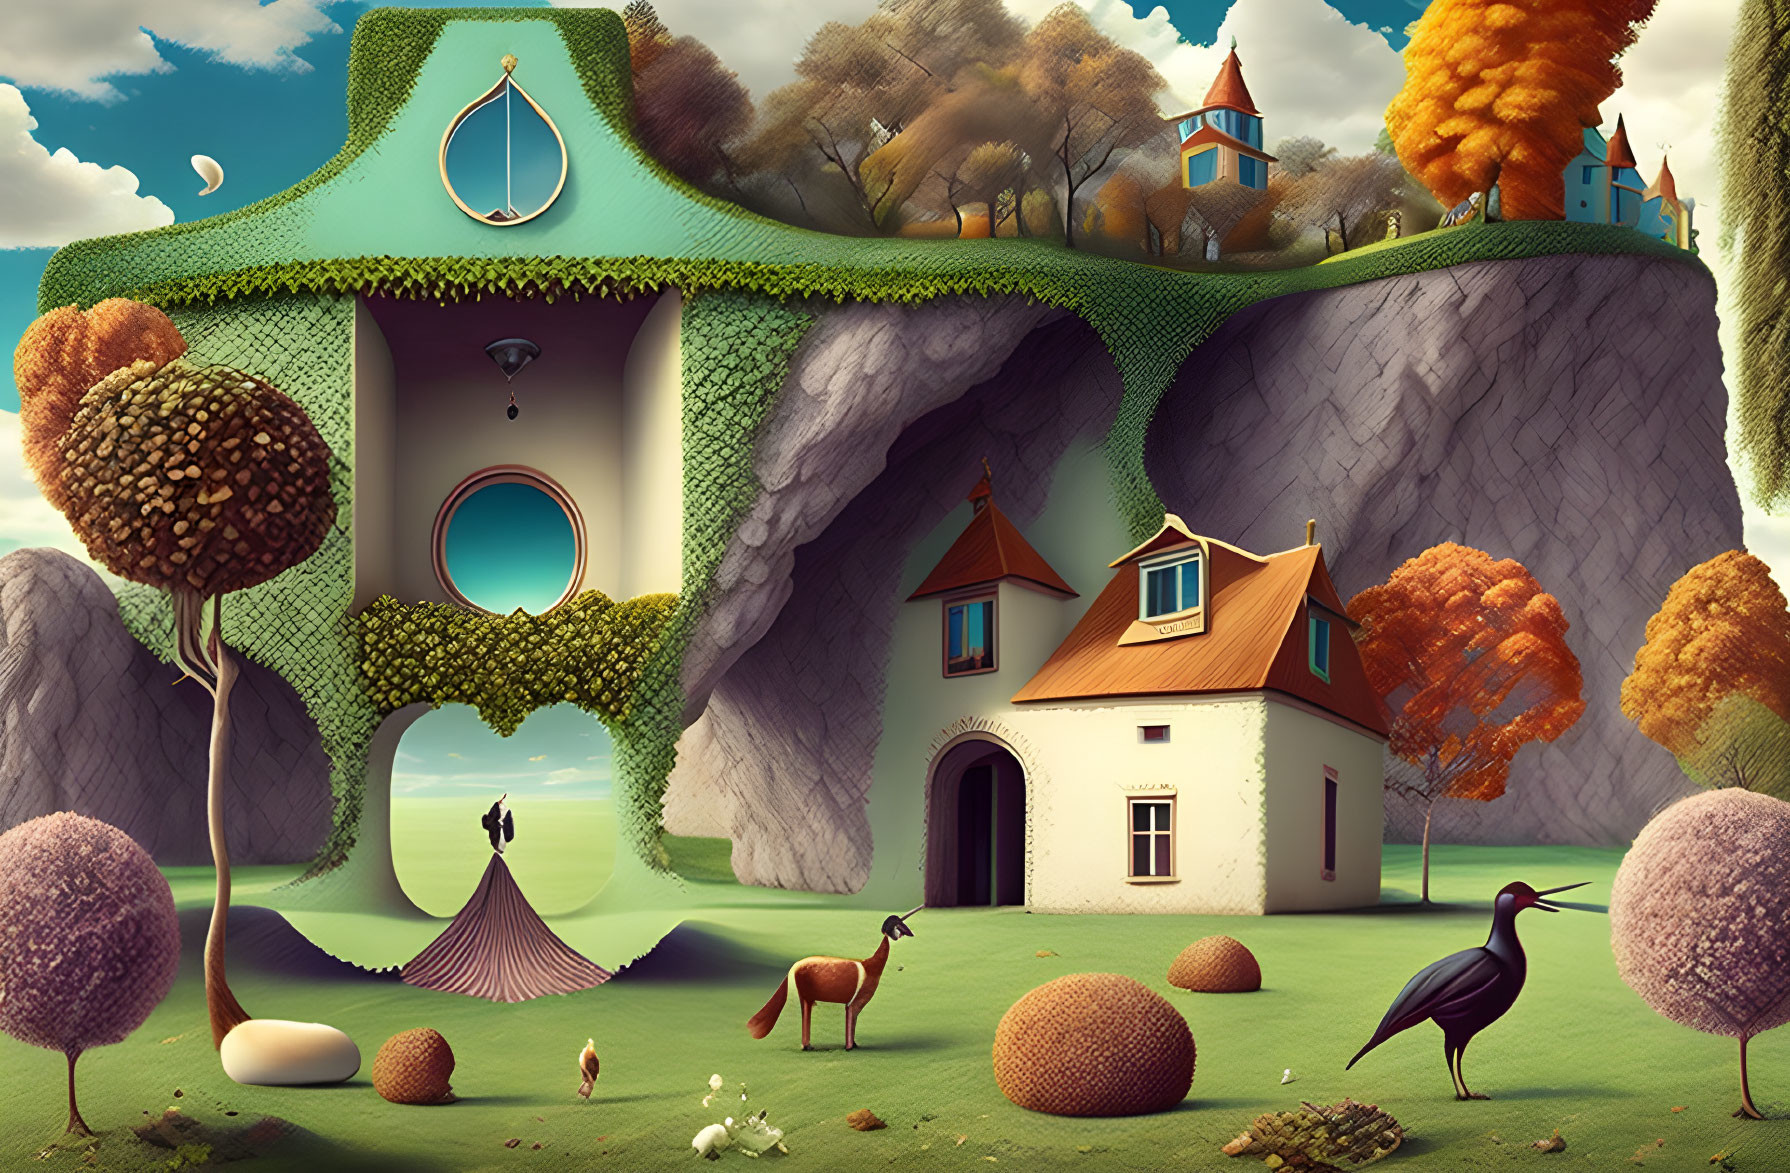 Fantasy-style treehouse in whimsical landscape with colorful trees and grazing animals.